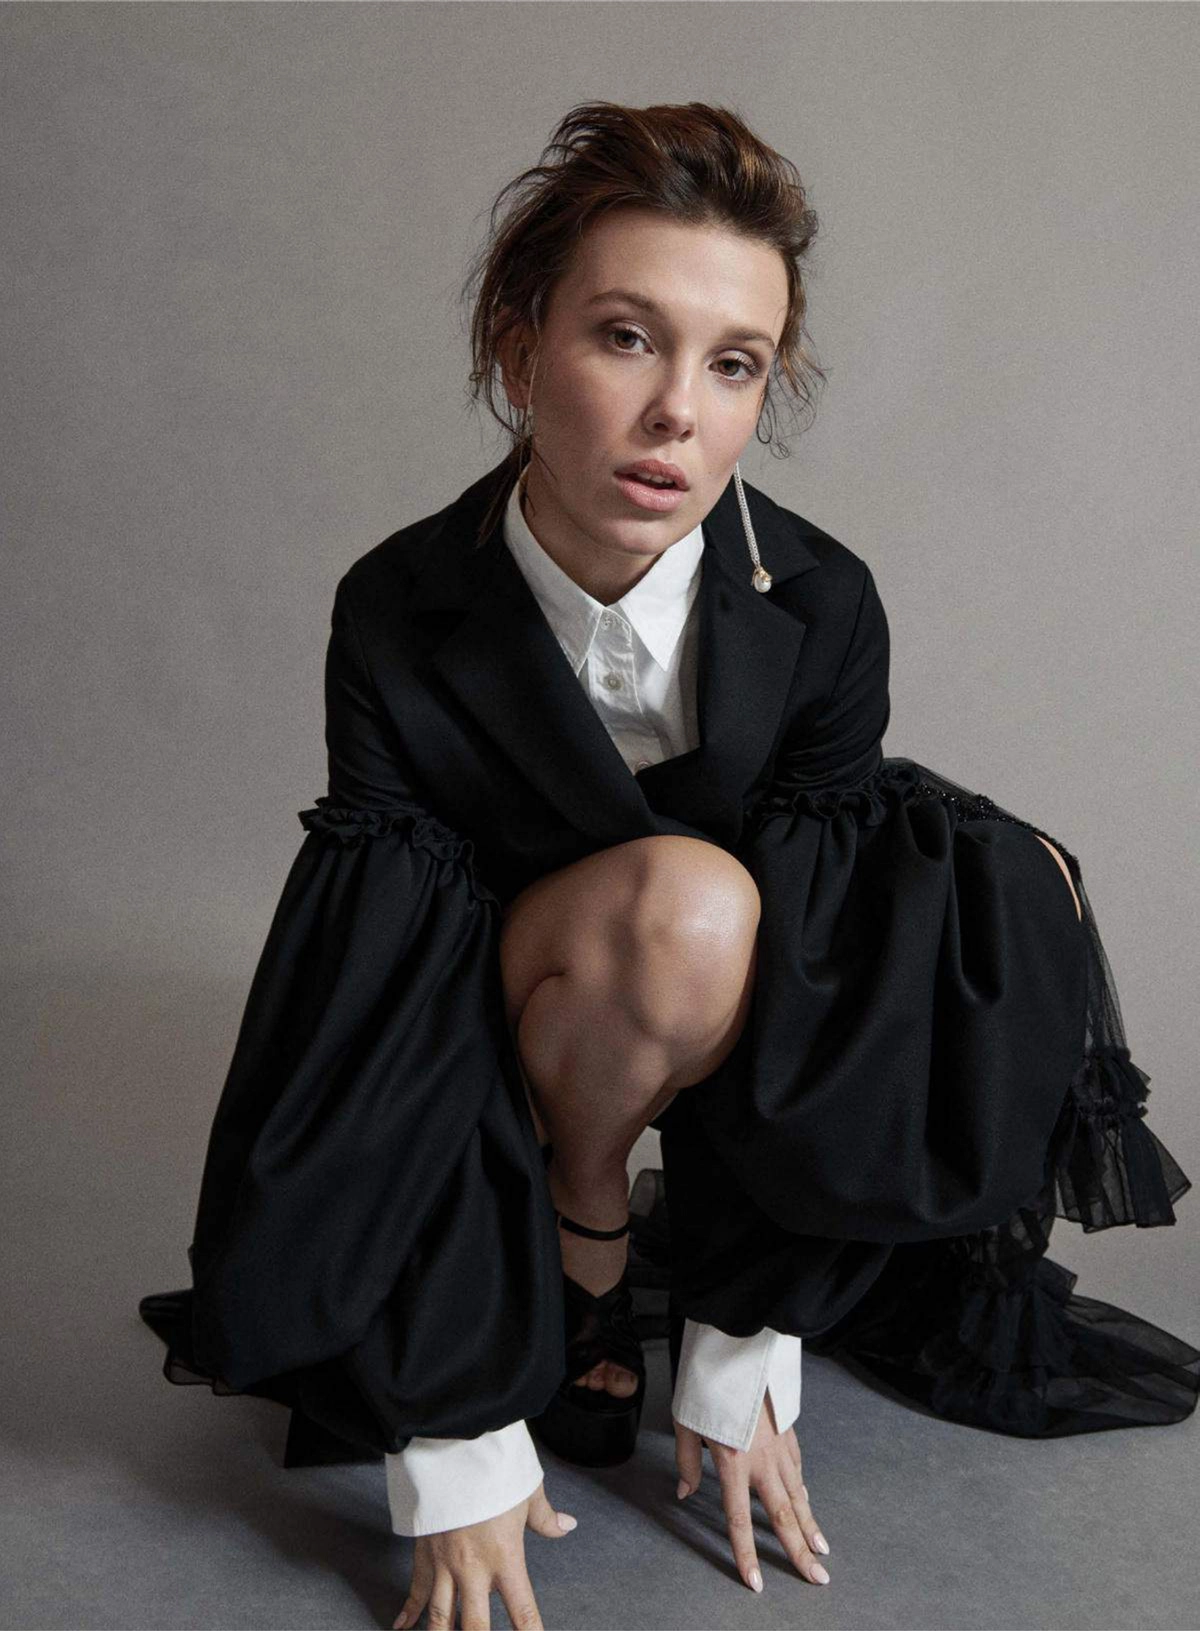 Millie Bobby Brown covers Vogue Mexico & Latin America June 2022 by Claudia Knoepfel